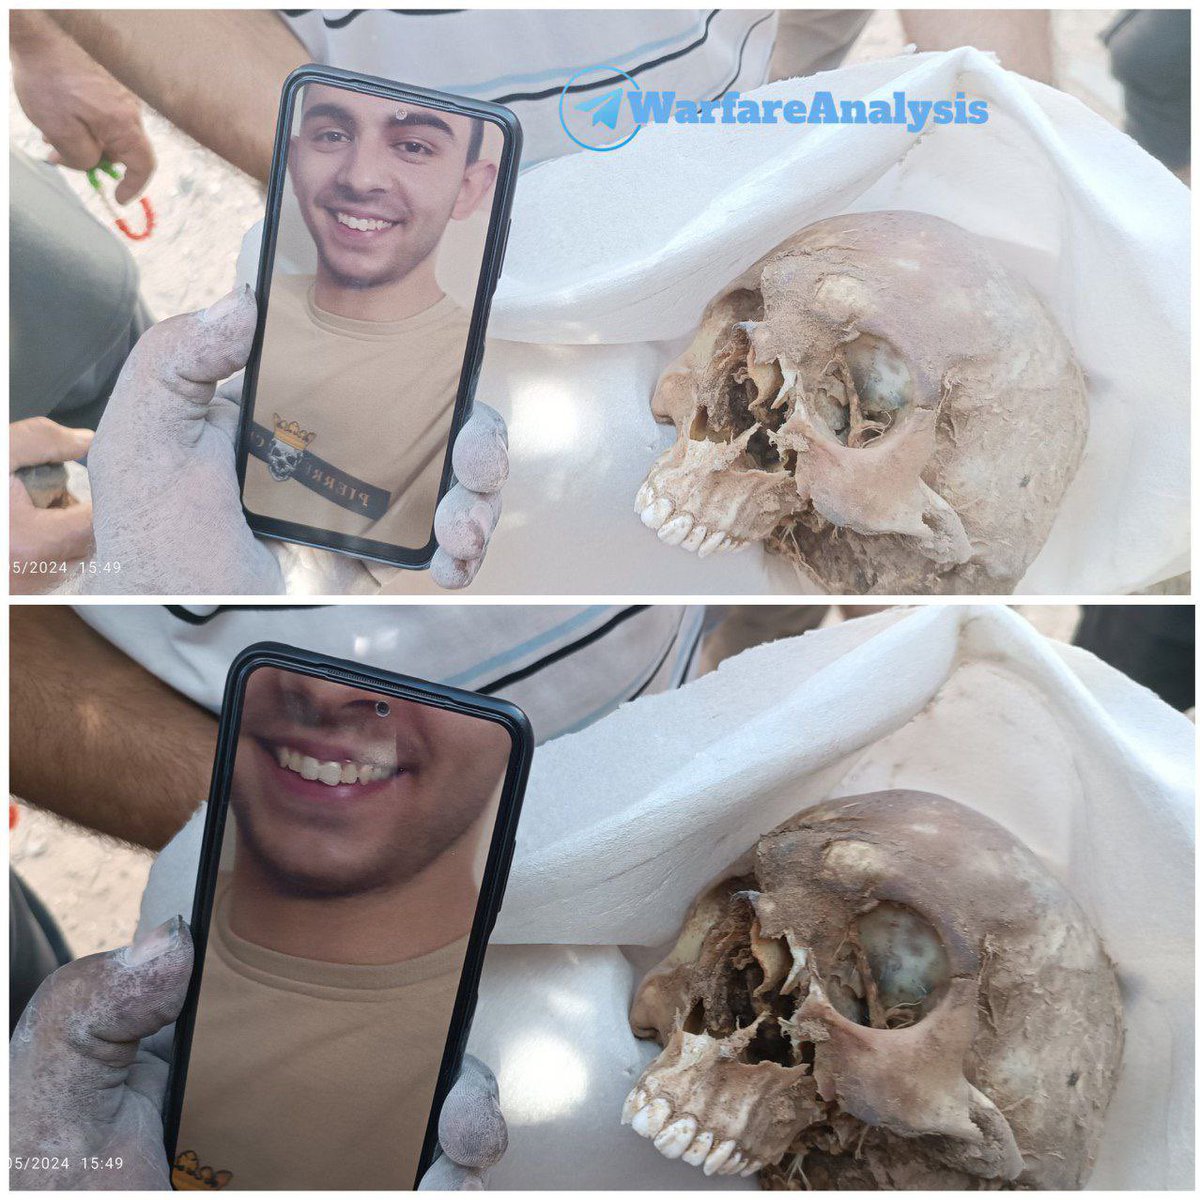 No words. The horror of having your find your child via a skull. From the shape of the teeth, the family was able to find the body of their son, the martyr Mahmoud Abd Rabbo, 19 years old, in Jabalia camp after the terrorist army withdrew from it.